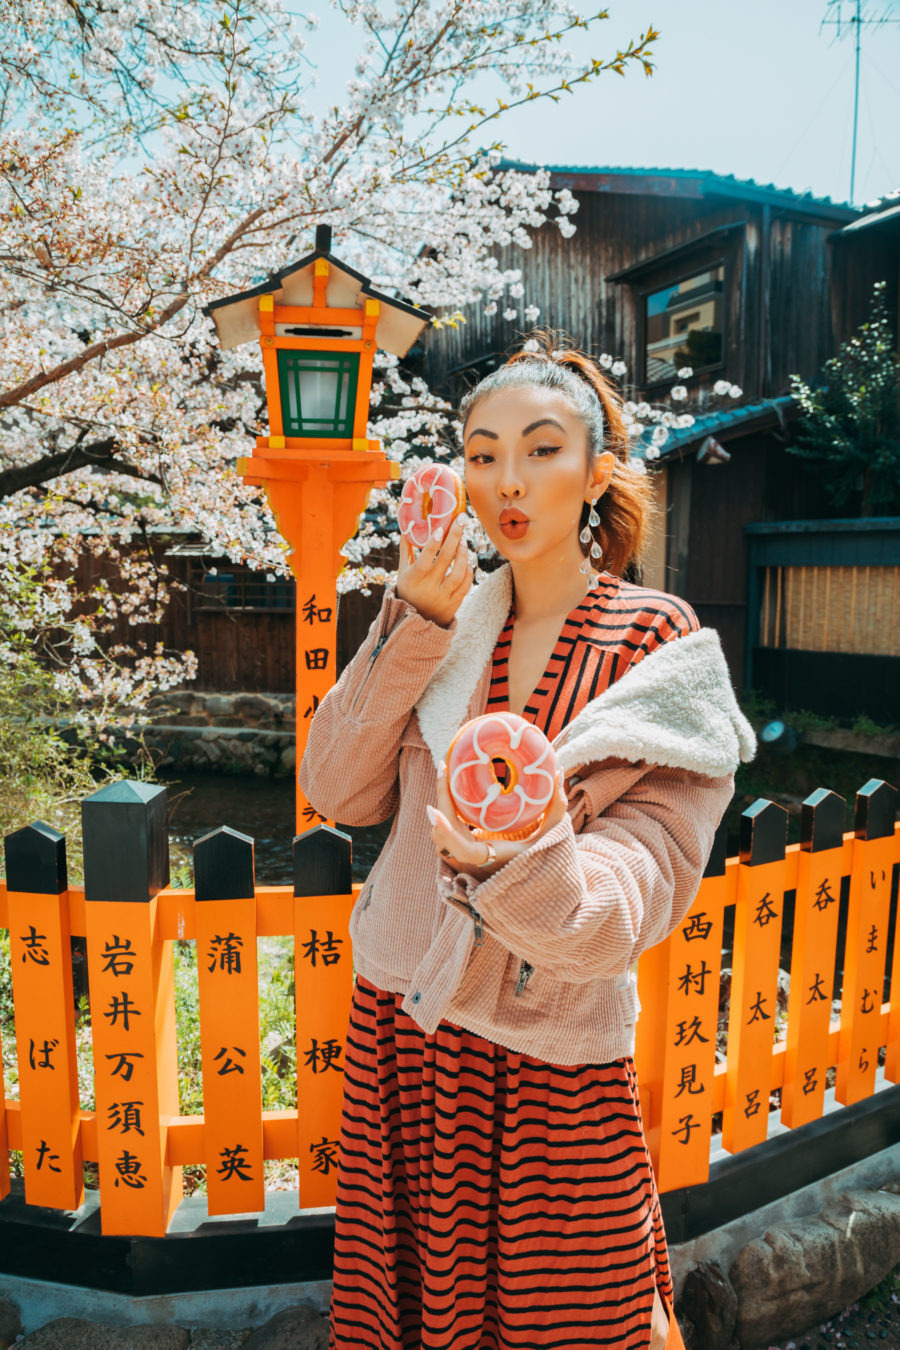 7 Best Spots for Cherry Blossoms in Japan - Kyoto - Stroll along Shirakawa River of Gion, luxury travel blogger // Notjessfashion.com